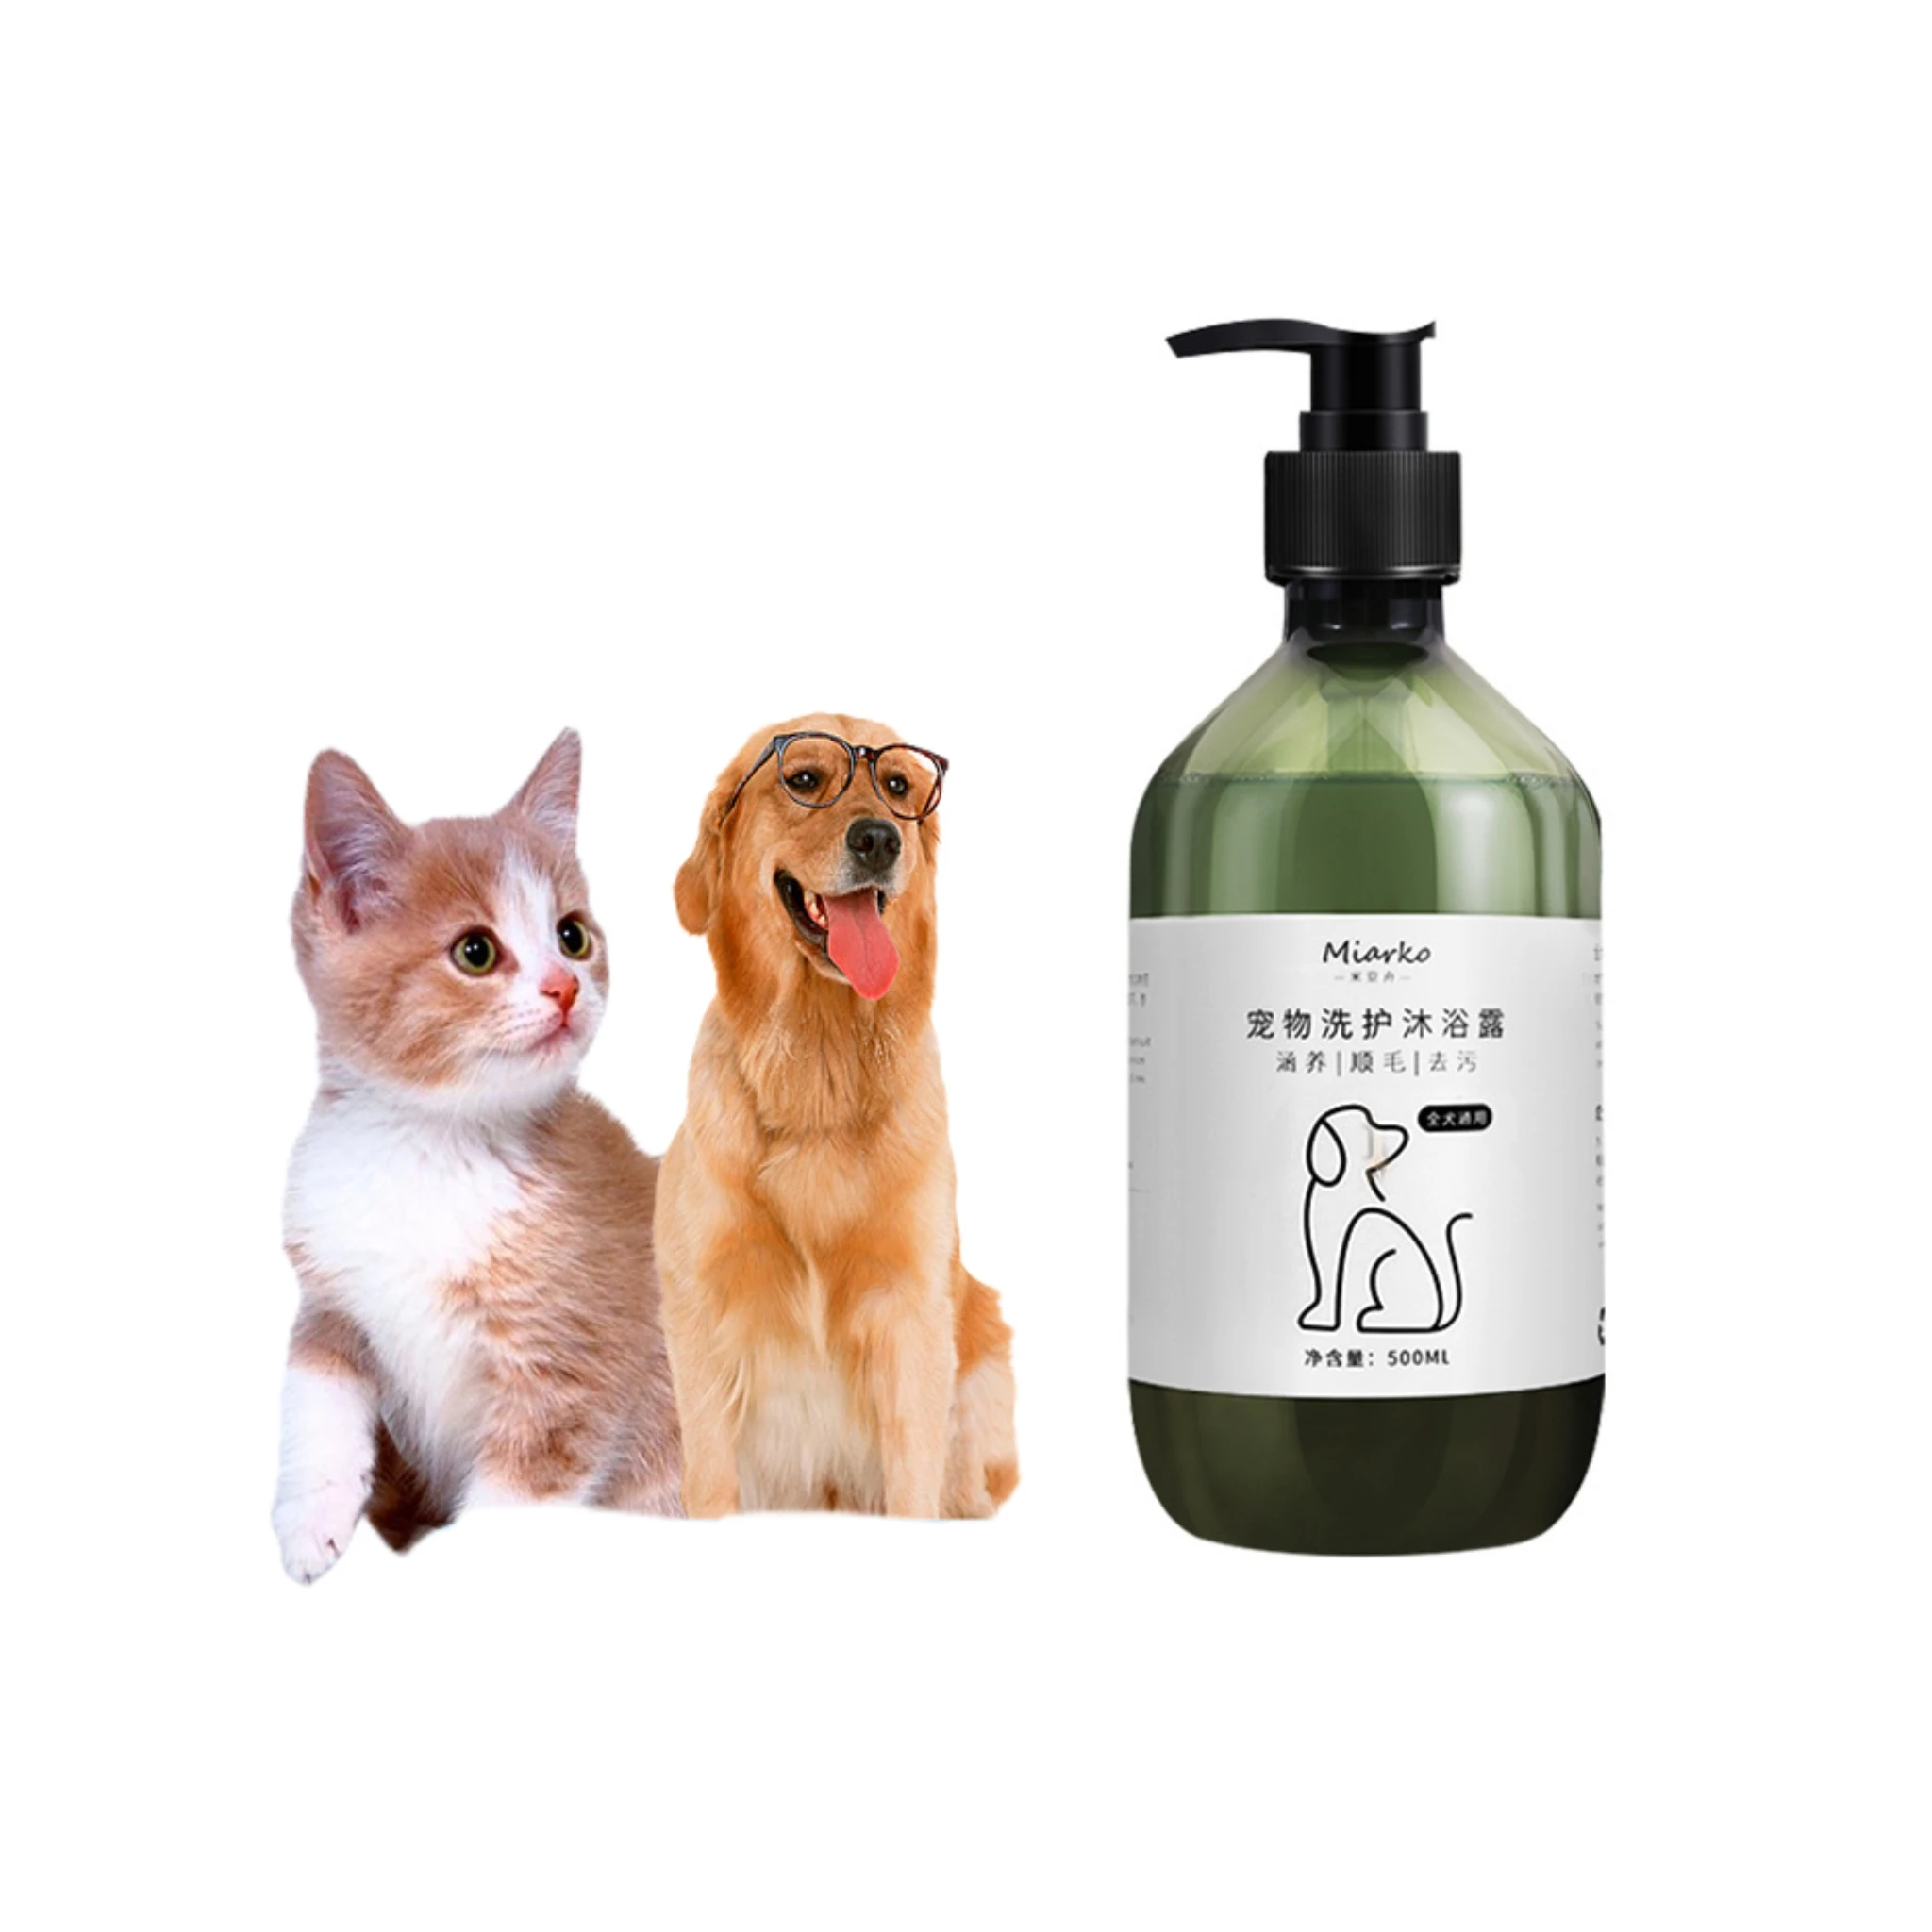 Wholesale 250ML Dog shampoo Private Label pet cleaning & bathing Pet Shampoo shampoo for dogs From m.alibaba.com